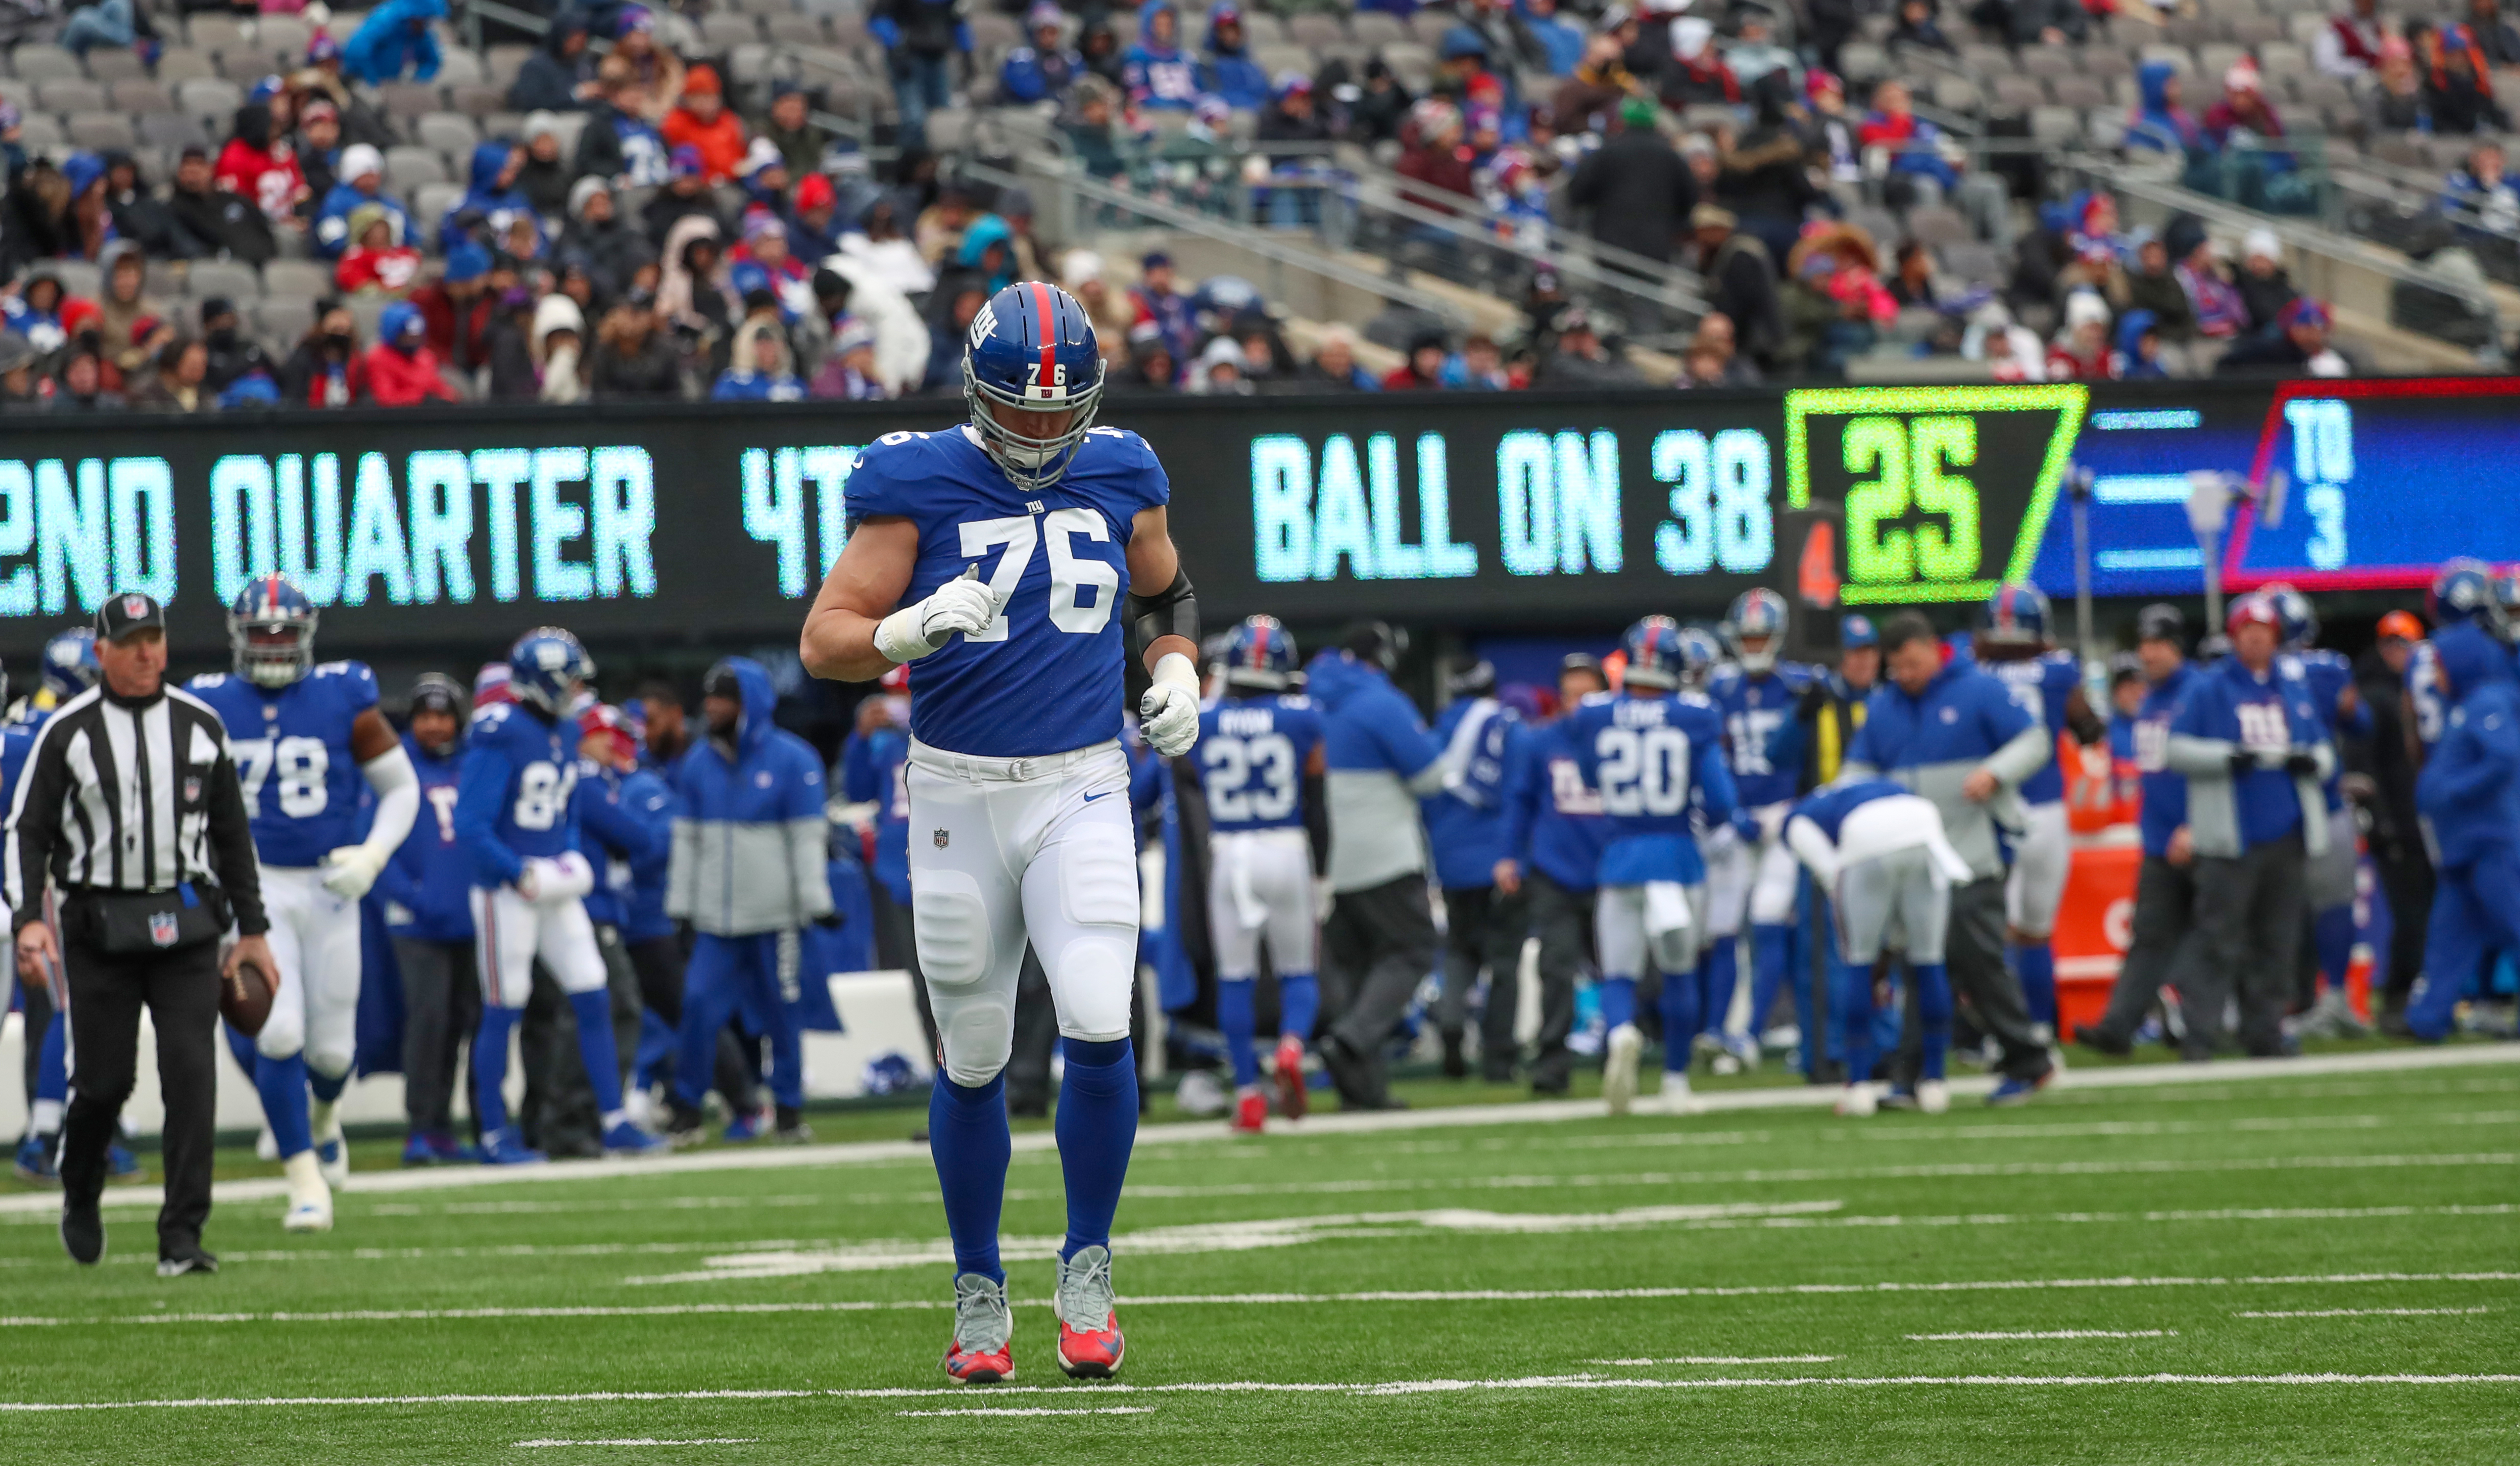 New York Giants offensive tackle Nate Solder (76) trots onto the field during the second quarter against the Washington Football Team on Sunday, Jan. 9, 2022 in East Rutherford, N.J.